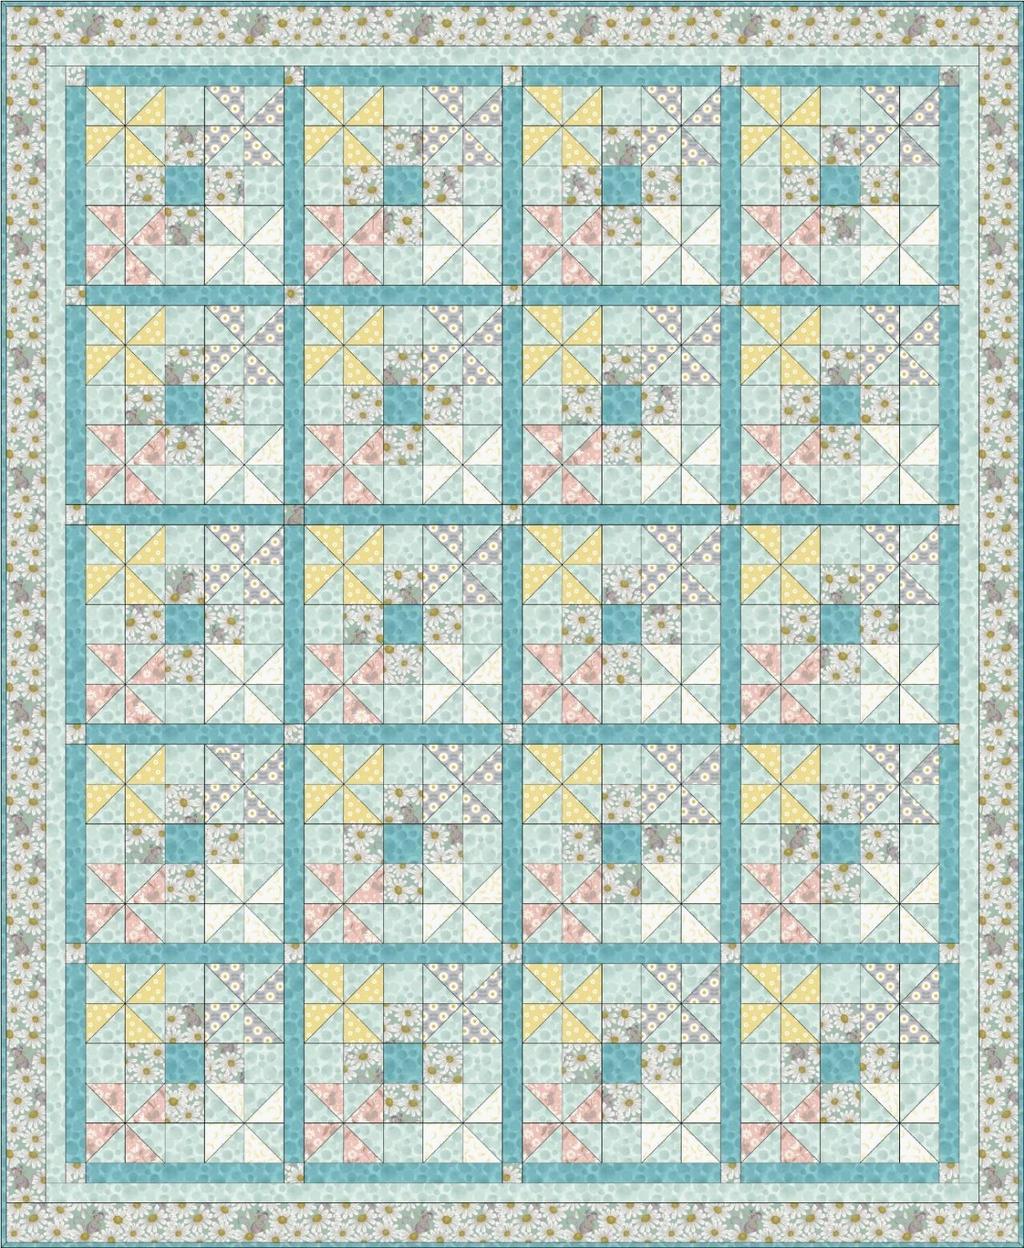 Love Me Love Me Not Quilt Designed and made by Sally Ablett Size: 51 x 62 Block: 10½ x 10½ DESIGN 2 (Main Diagram) FABRIC REQUIREMENTS (Love Me Love Me Not Collection) Fabric 1: 1yd - 1mtr - A271.